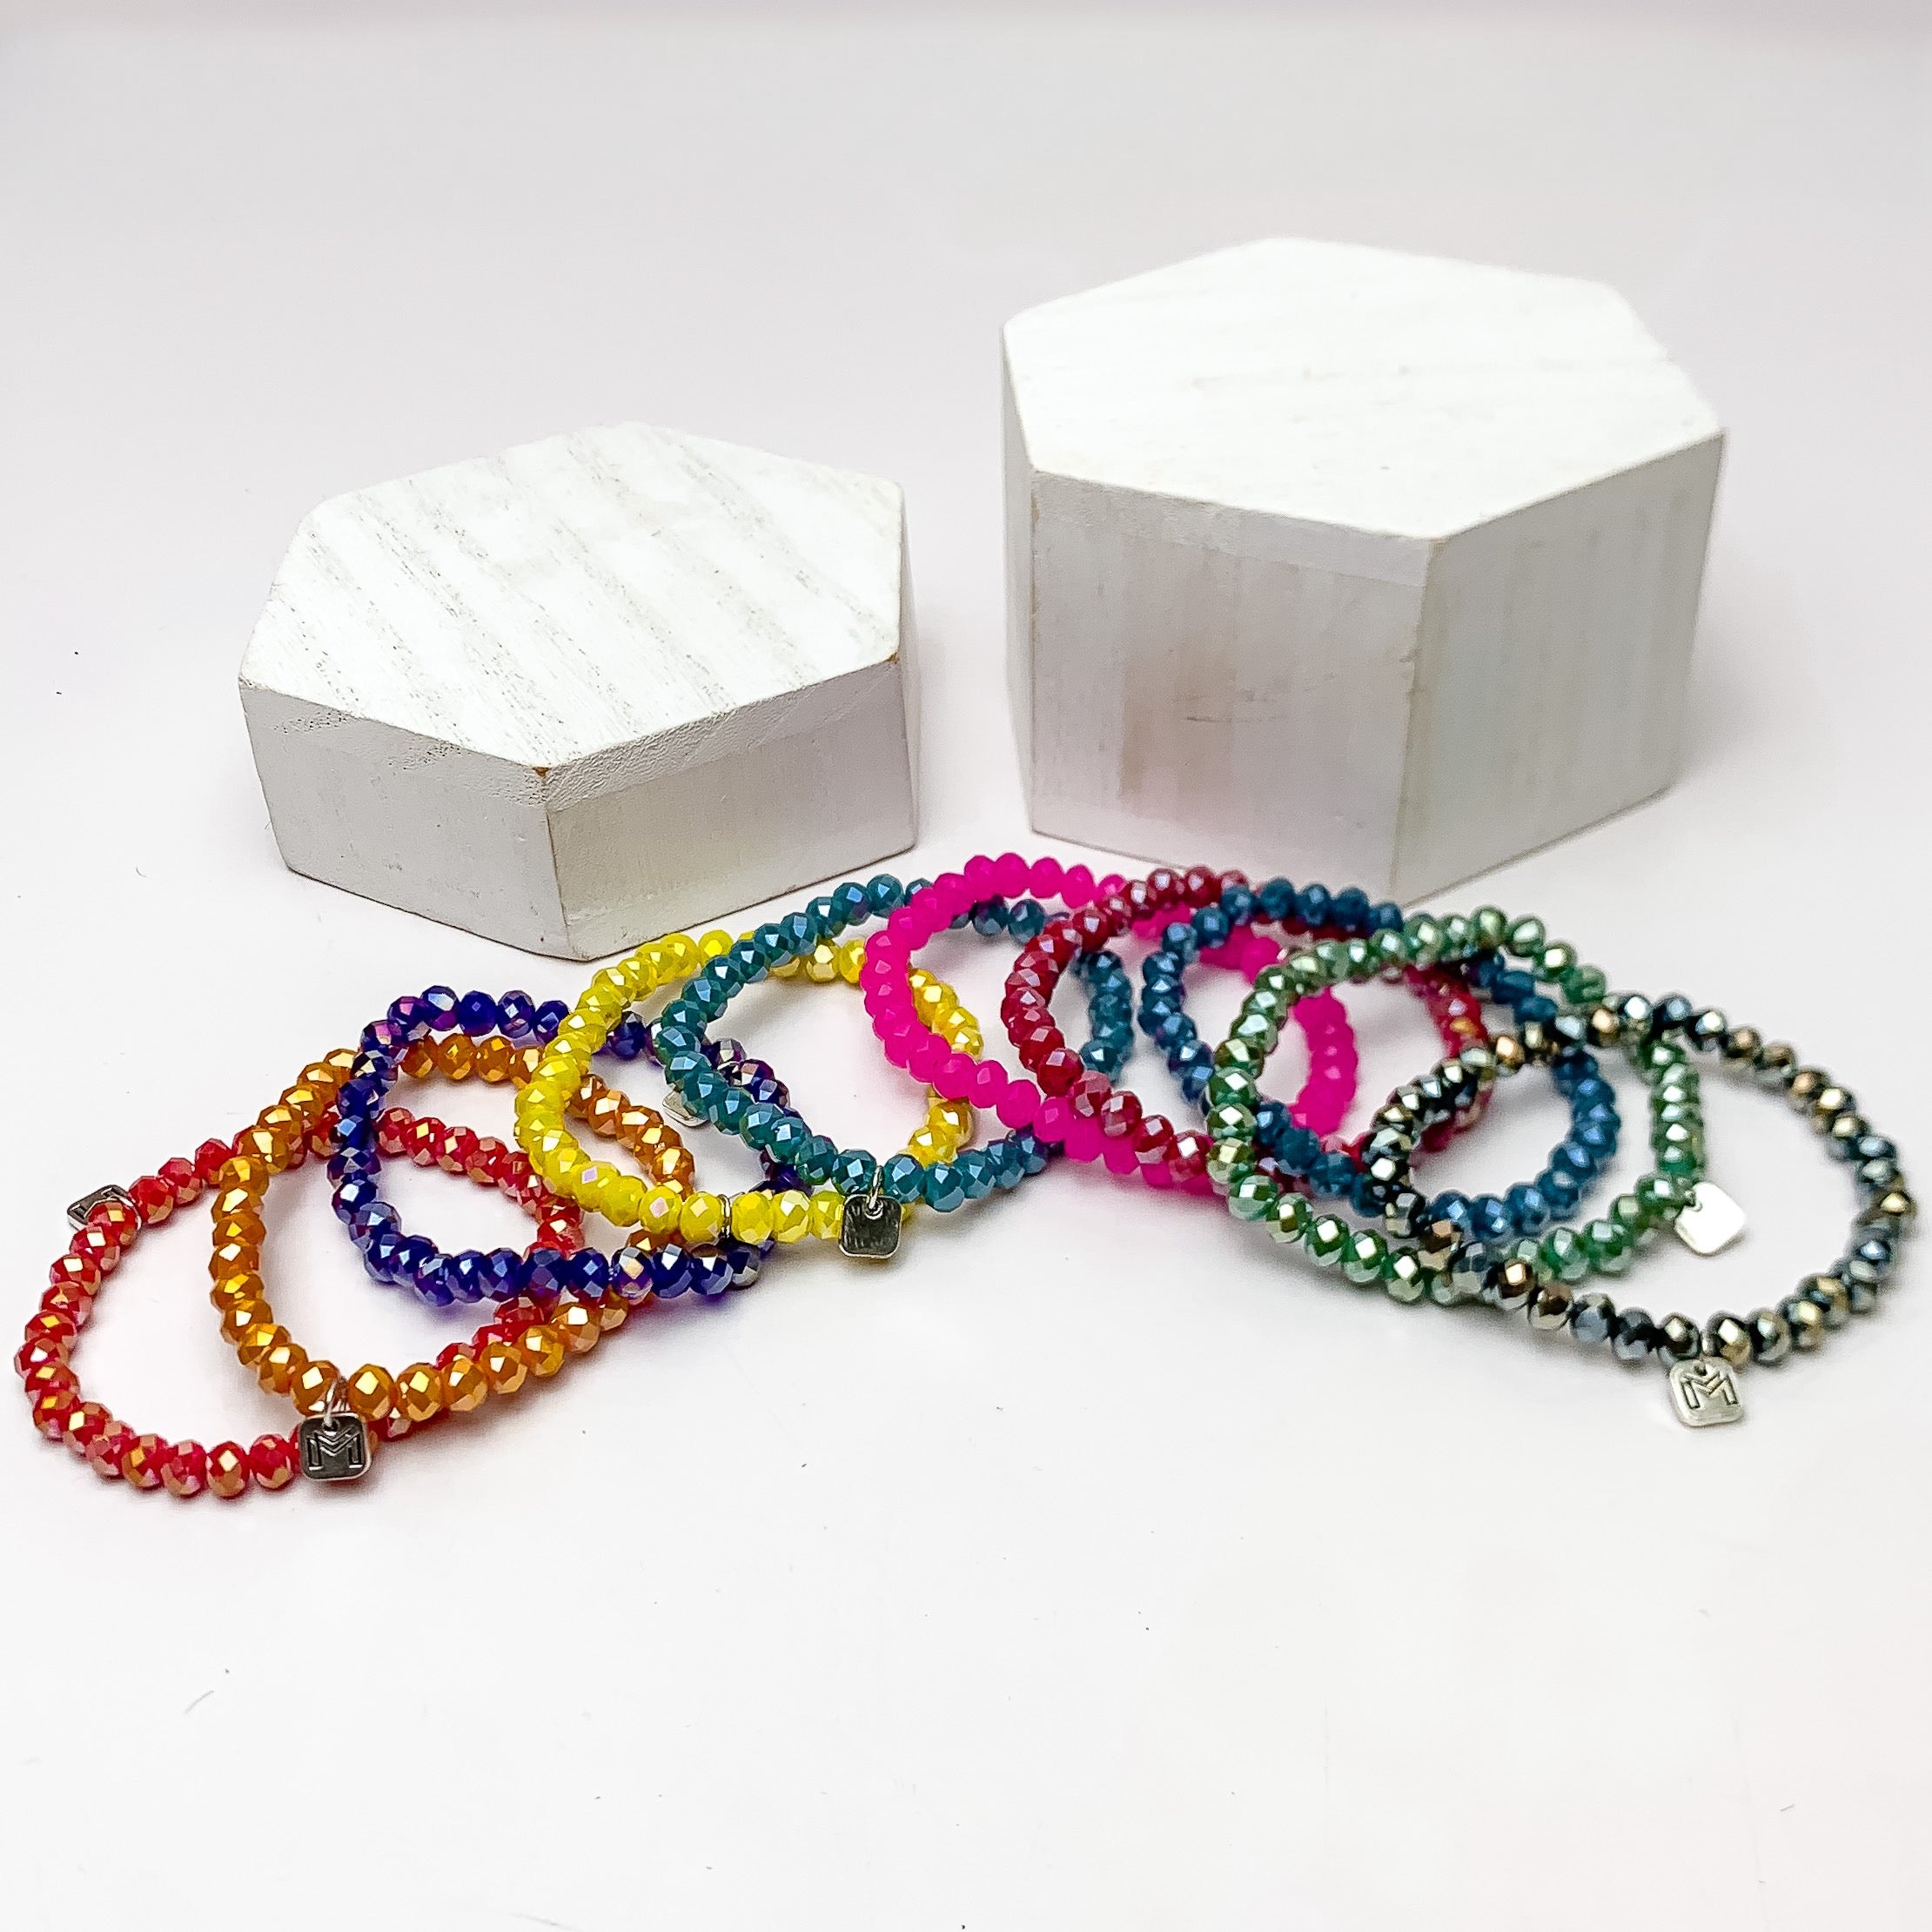 Set of Ten | Party Girl Crystal Beaded Bracelet Set in Dark Multicolor. These bracelets are pictured on a white background with two white podiums behind the bracelets.